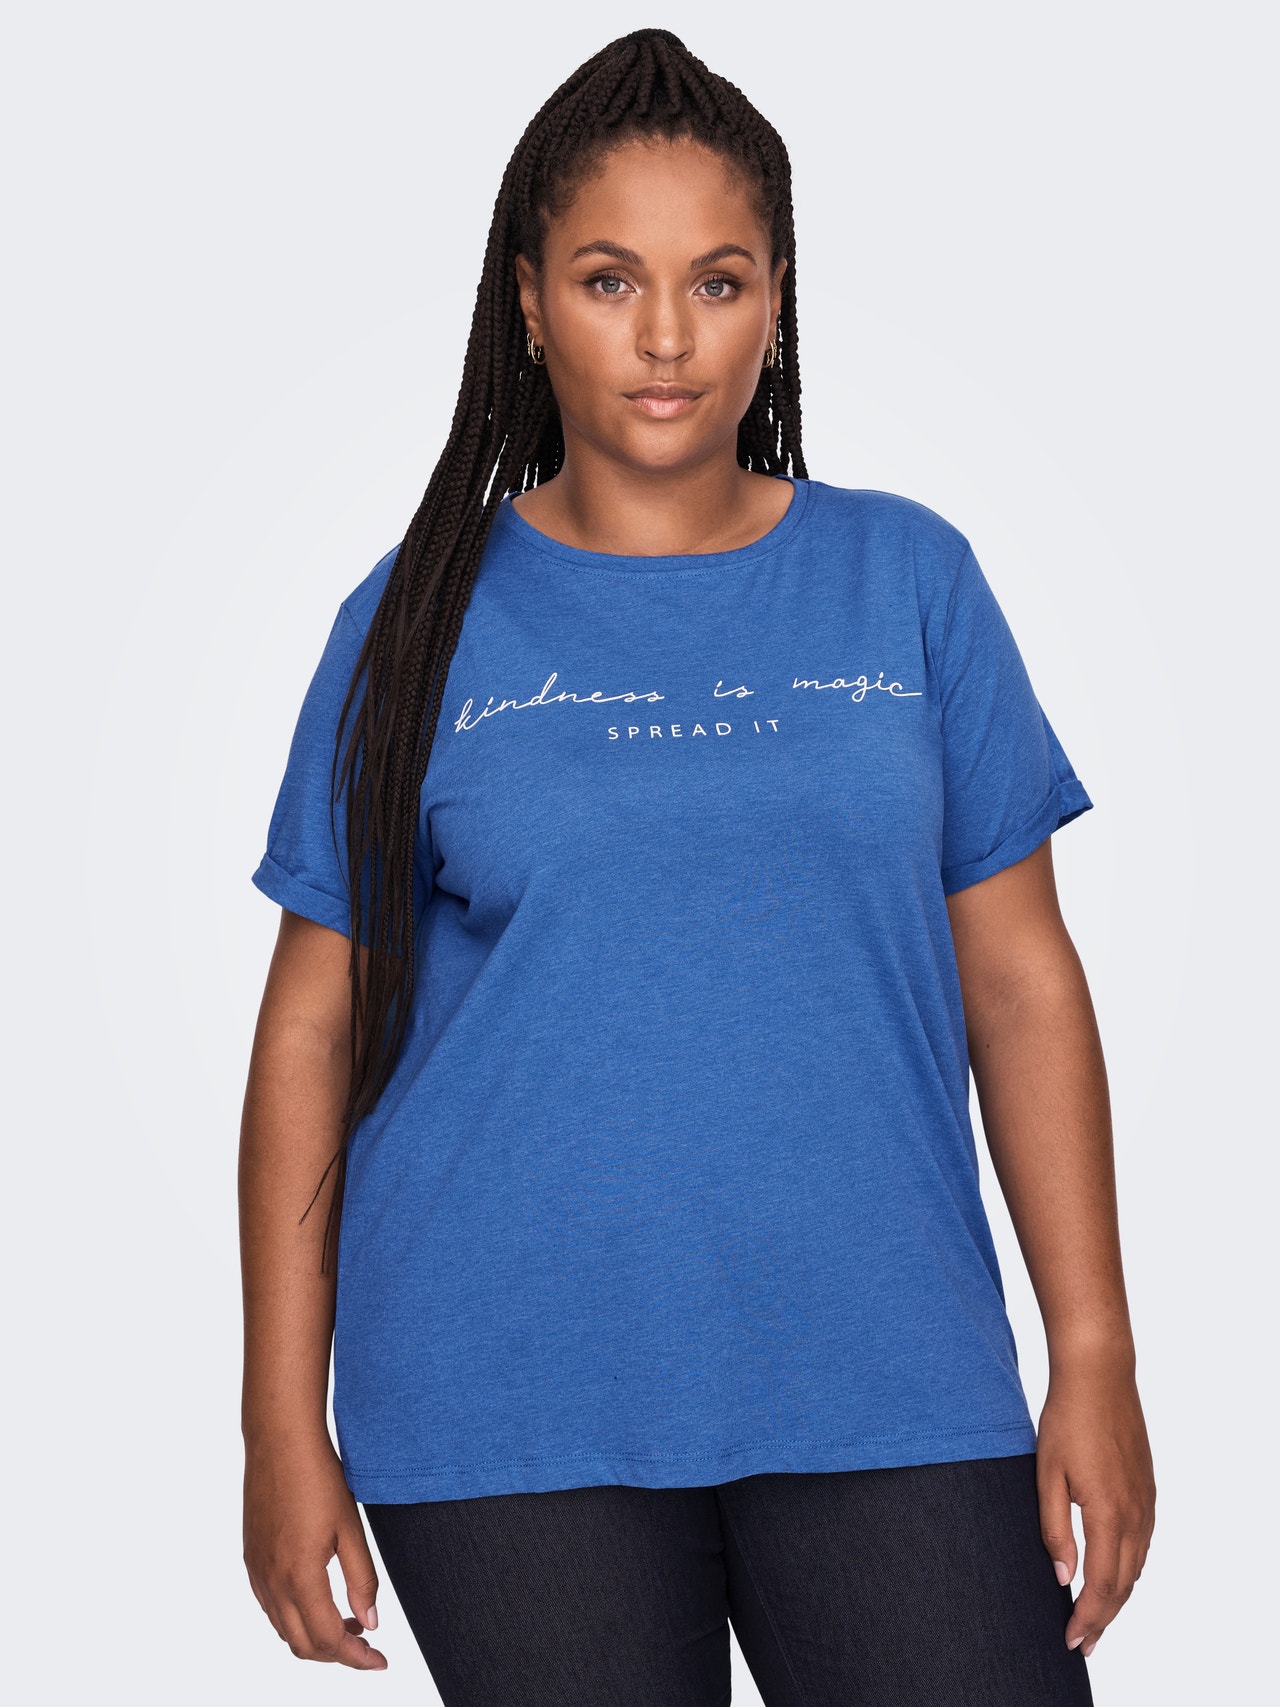 ONLY Regular Fit Round Neck T-Shirt -Strong Blue - 15251650